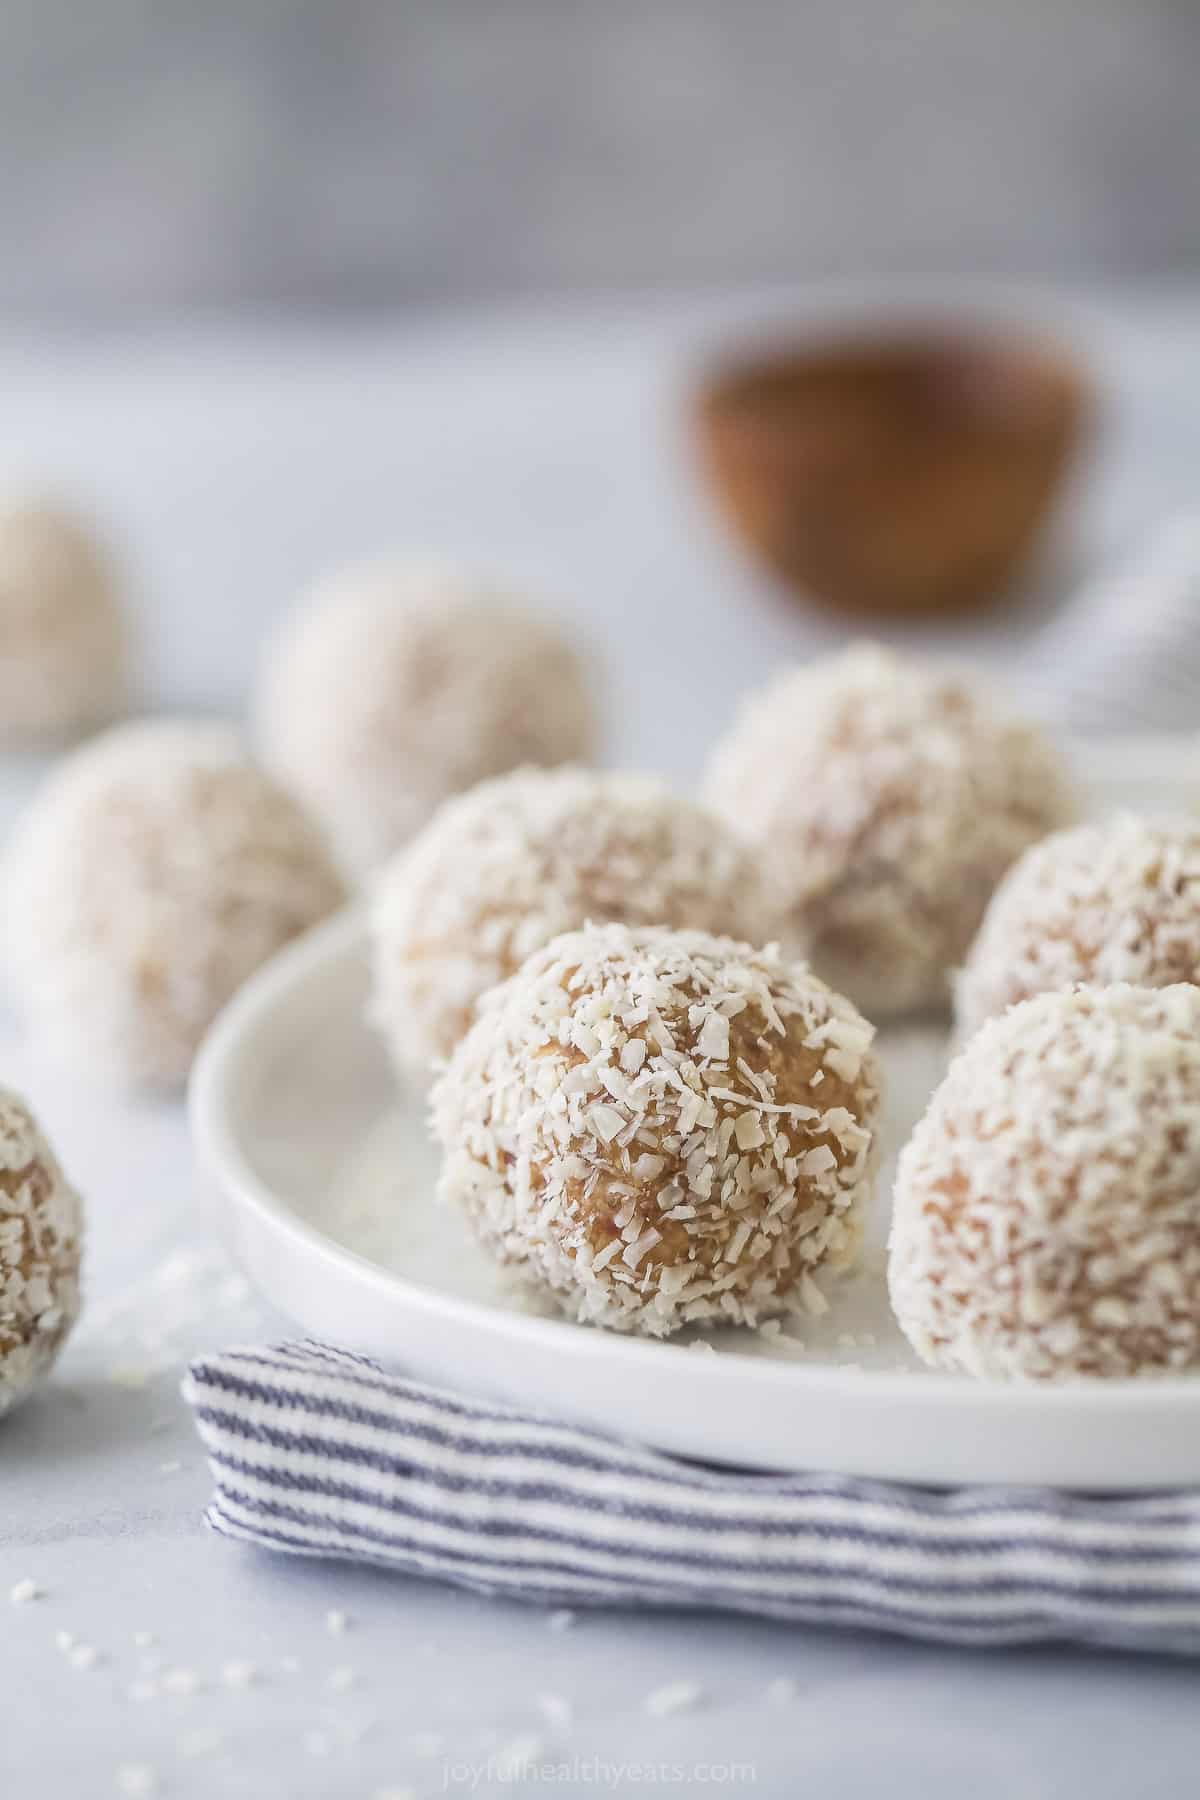 Coconut bliss balls on a plate on top of a striped dishtowel